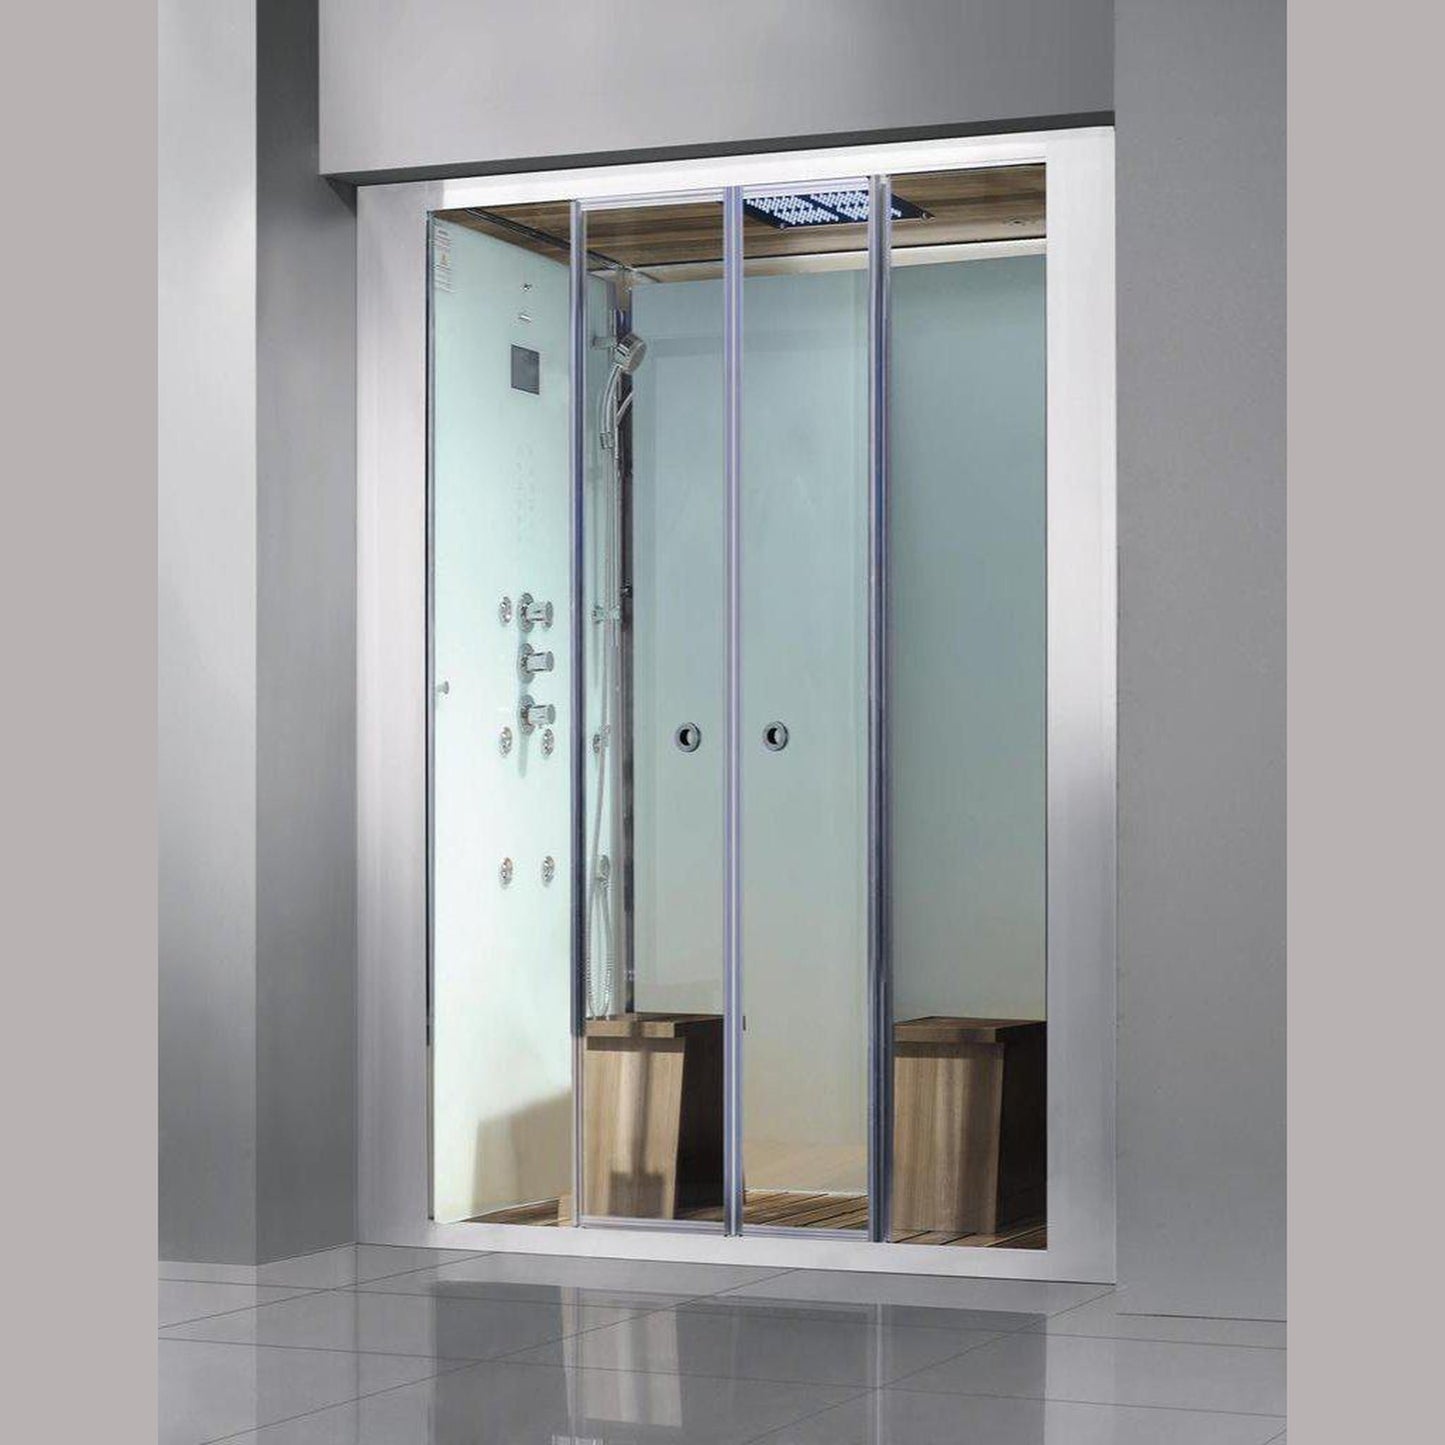 Athena 59" x 36" x 87" Two Person Framed White Colored Rectangle Steam Shower With Sliding Doors 12 Massage Jets & LED Chromatherapy Lighting